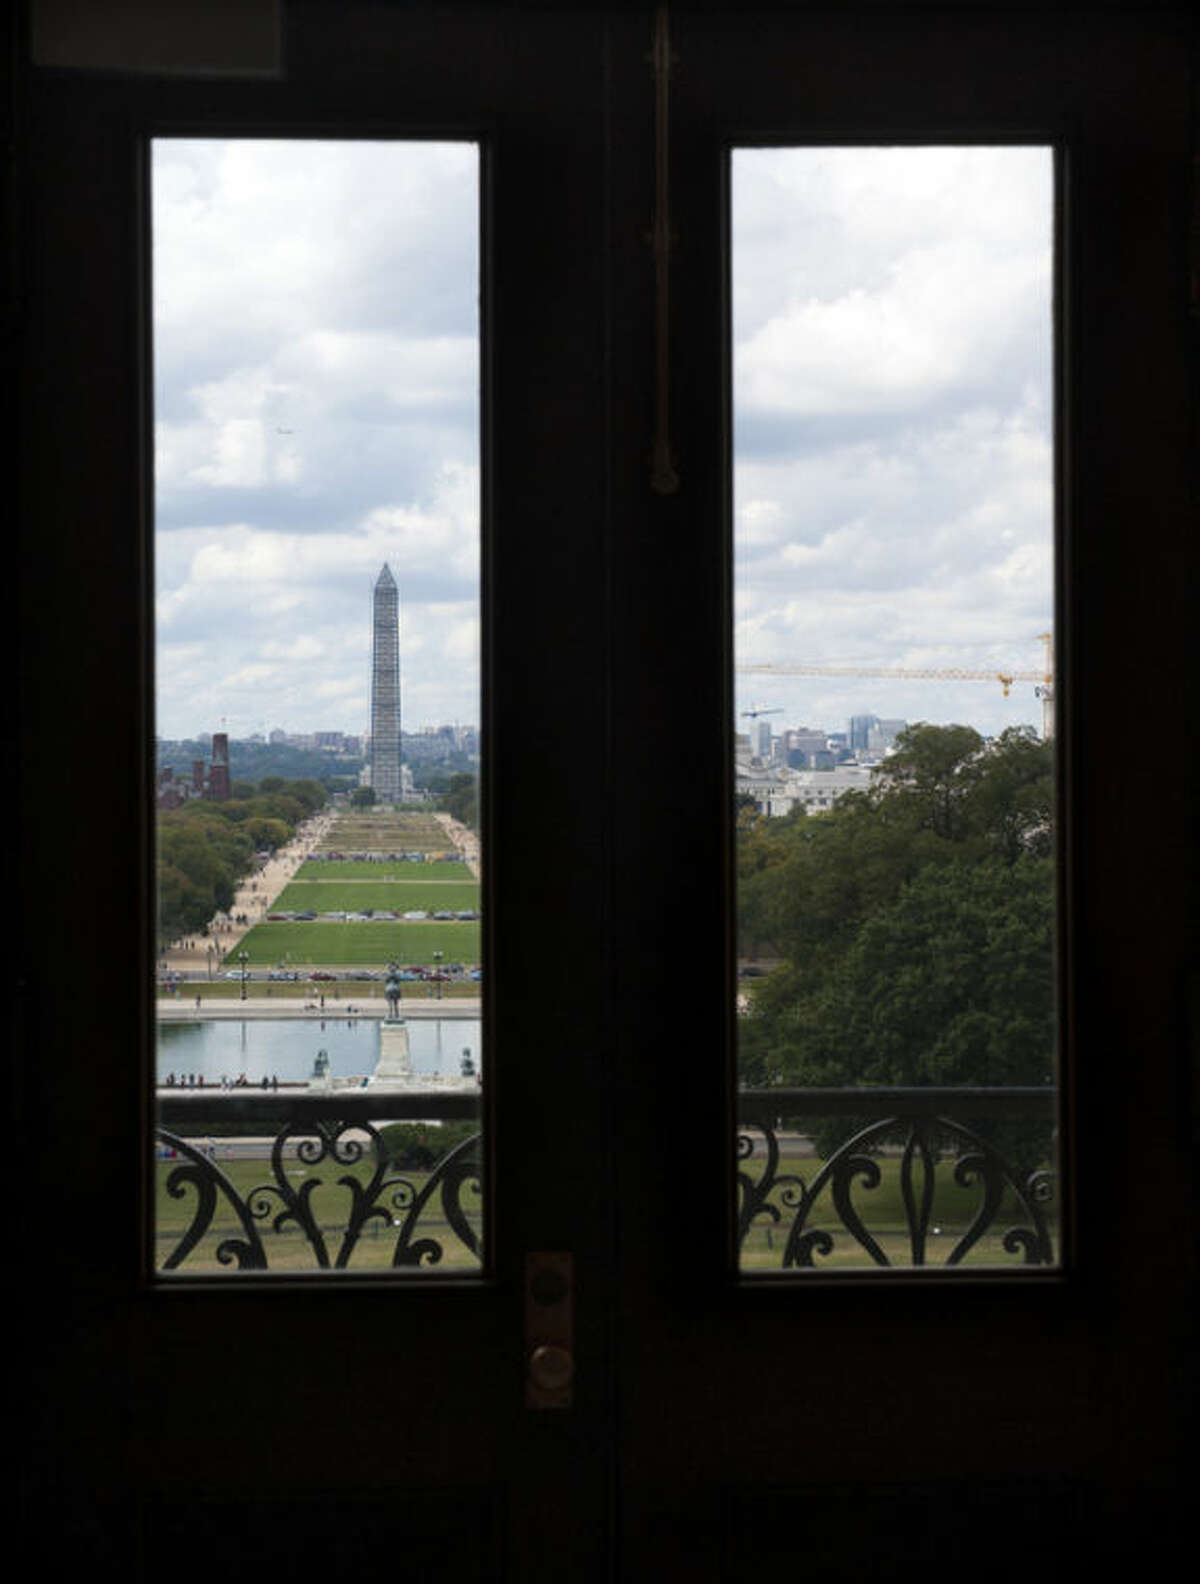 The Washington Monument is seen through windows in a door in the U.S. Capitol Sunday morning, Sept. 29, 2013, as the United States braces for a partial government shutdown Tuesday after the White House and congressional Democrats declared they would reject a bill approved by the Republican-led House to delay implementing President Barack Obama's health care reform.(AP Photo/Cliff Owen)